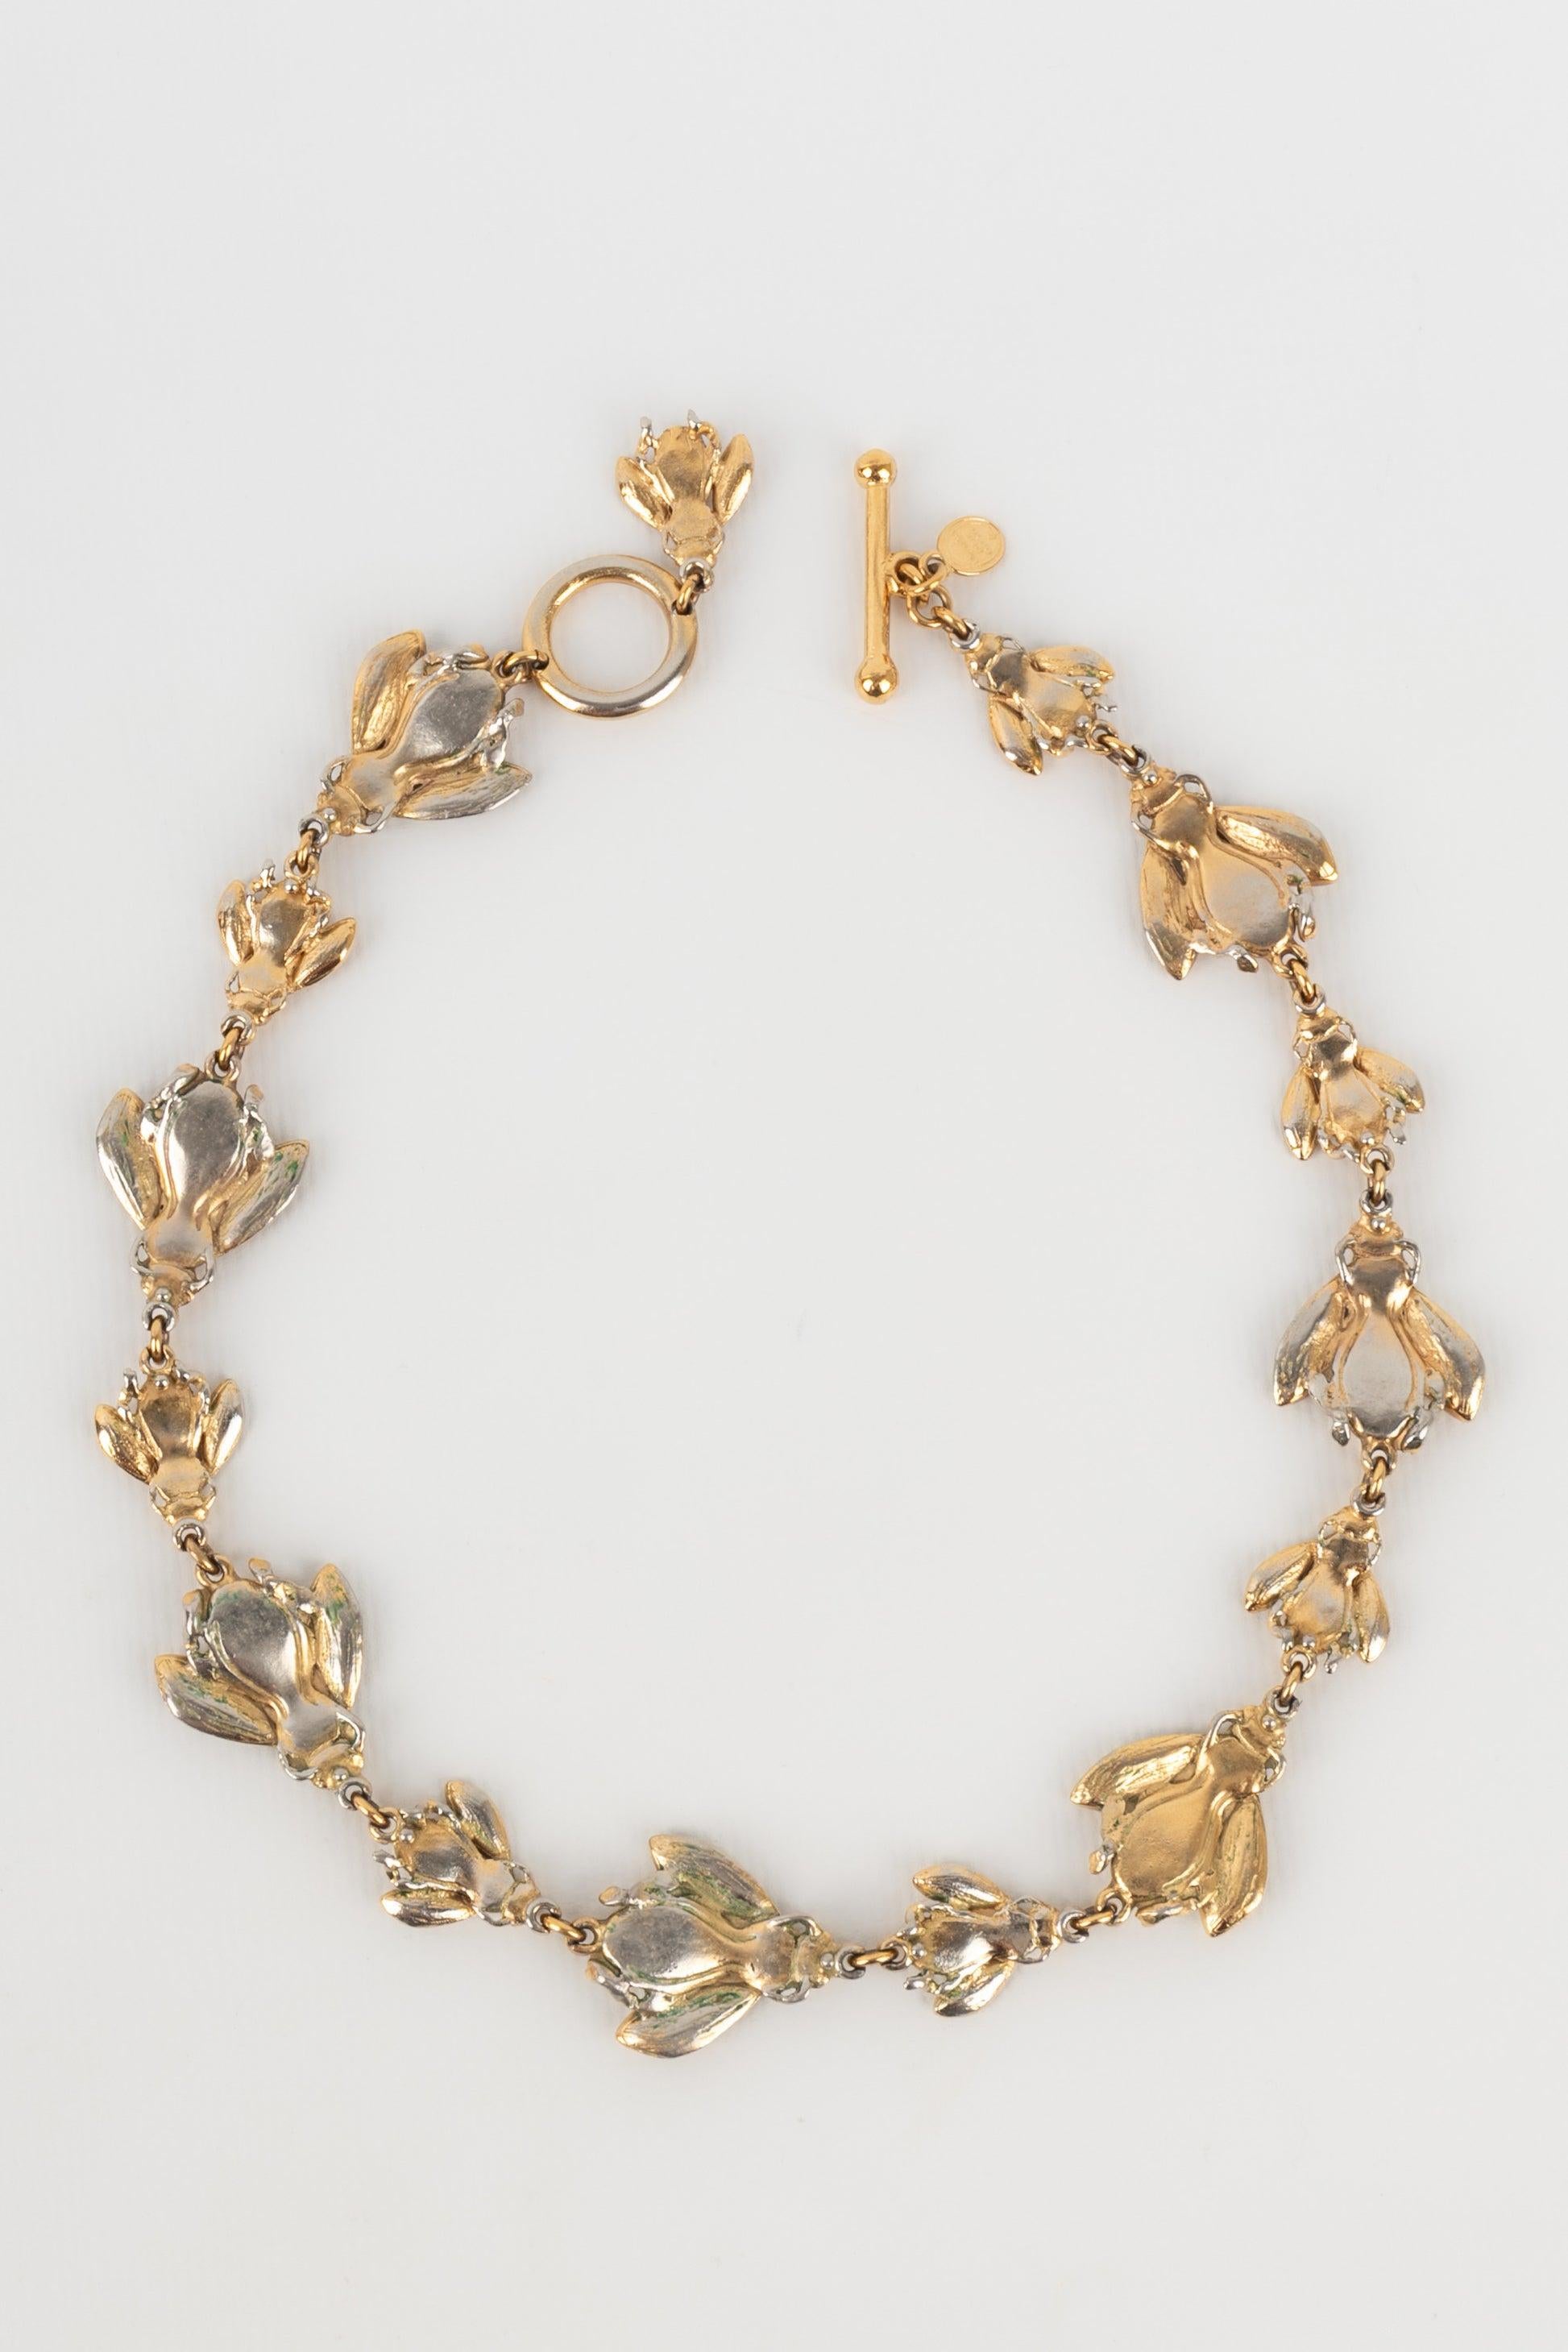 Dior - Golden metal short necklace representing bees.

Additional information:
Condition: Good condition
Dimensions: Length: 40 cm

Seller Reference: BC147